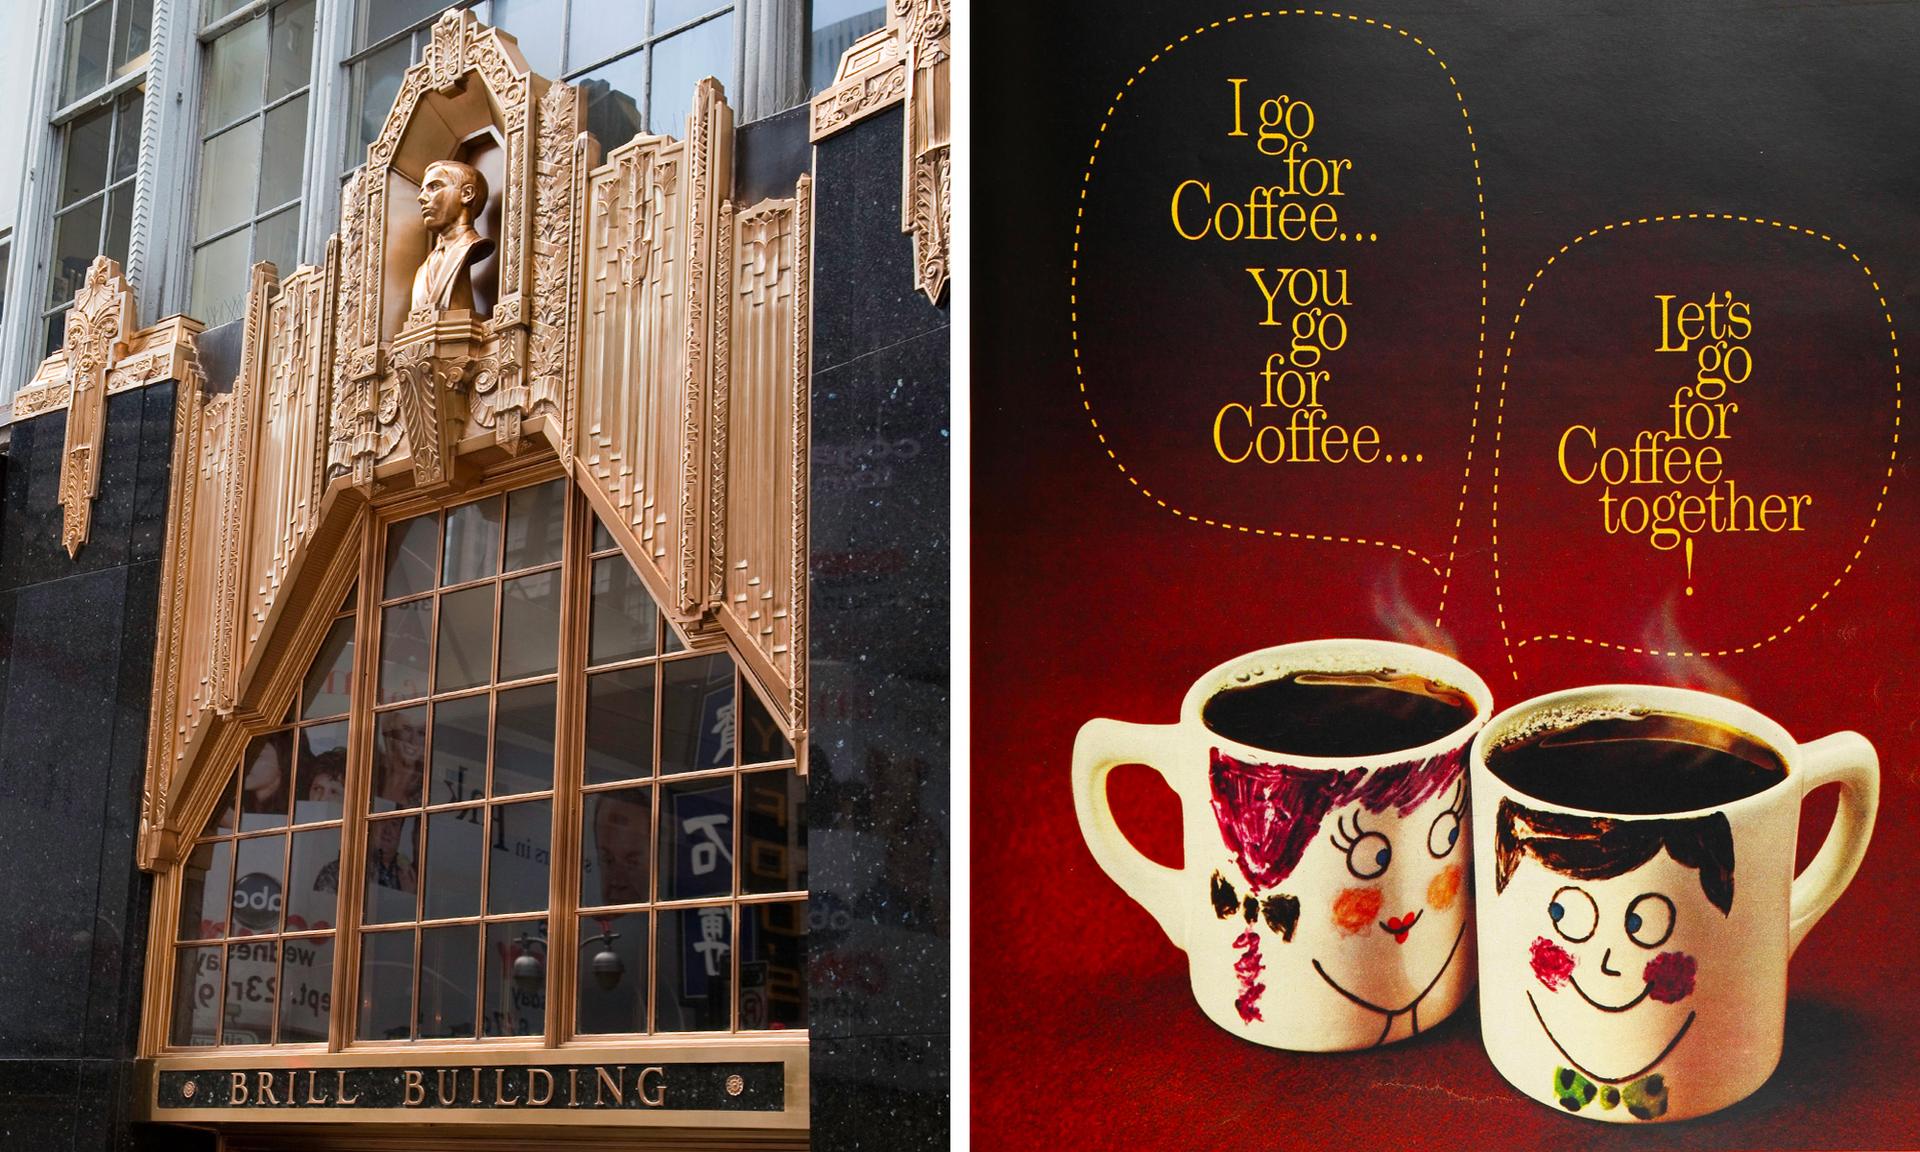 The Brill Building and a “Mugmates” advertisement.